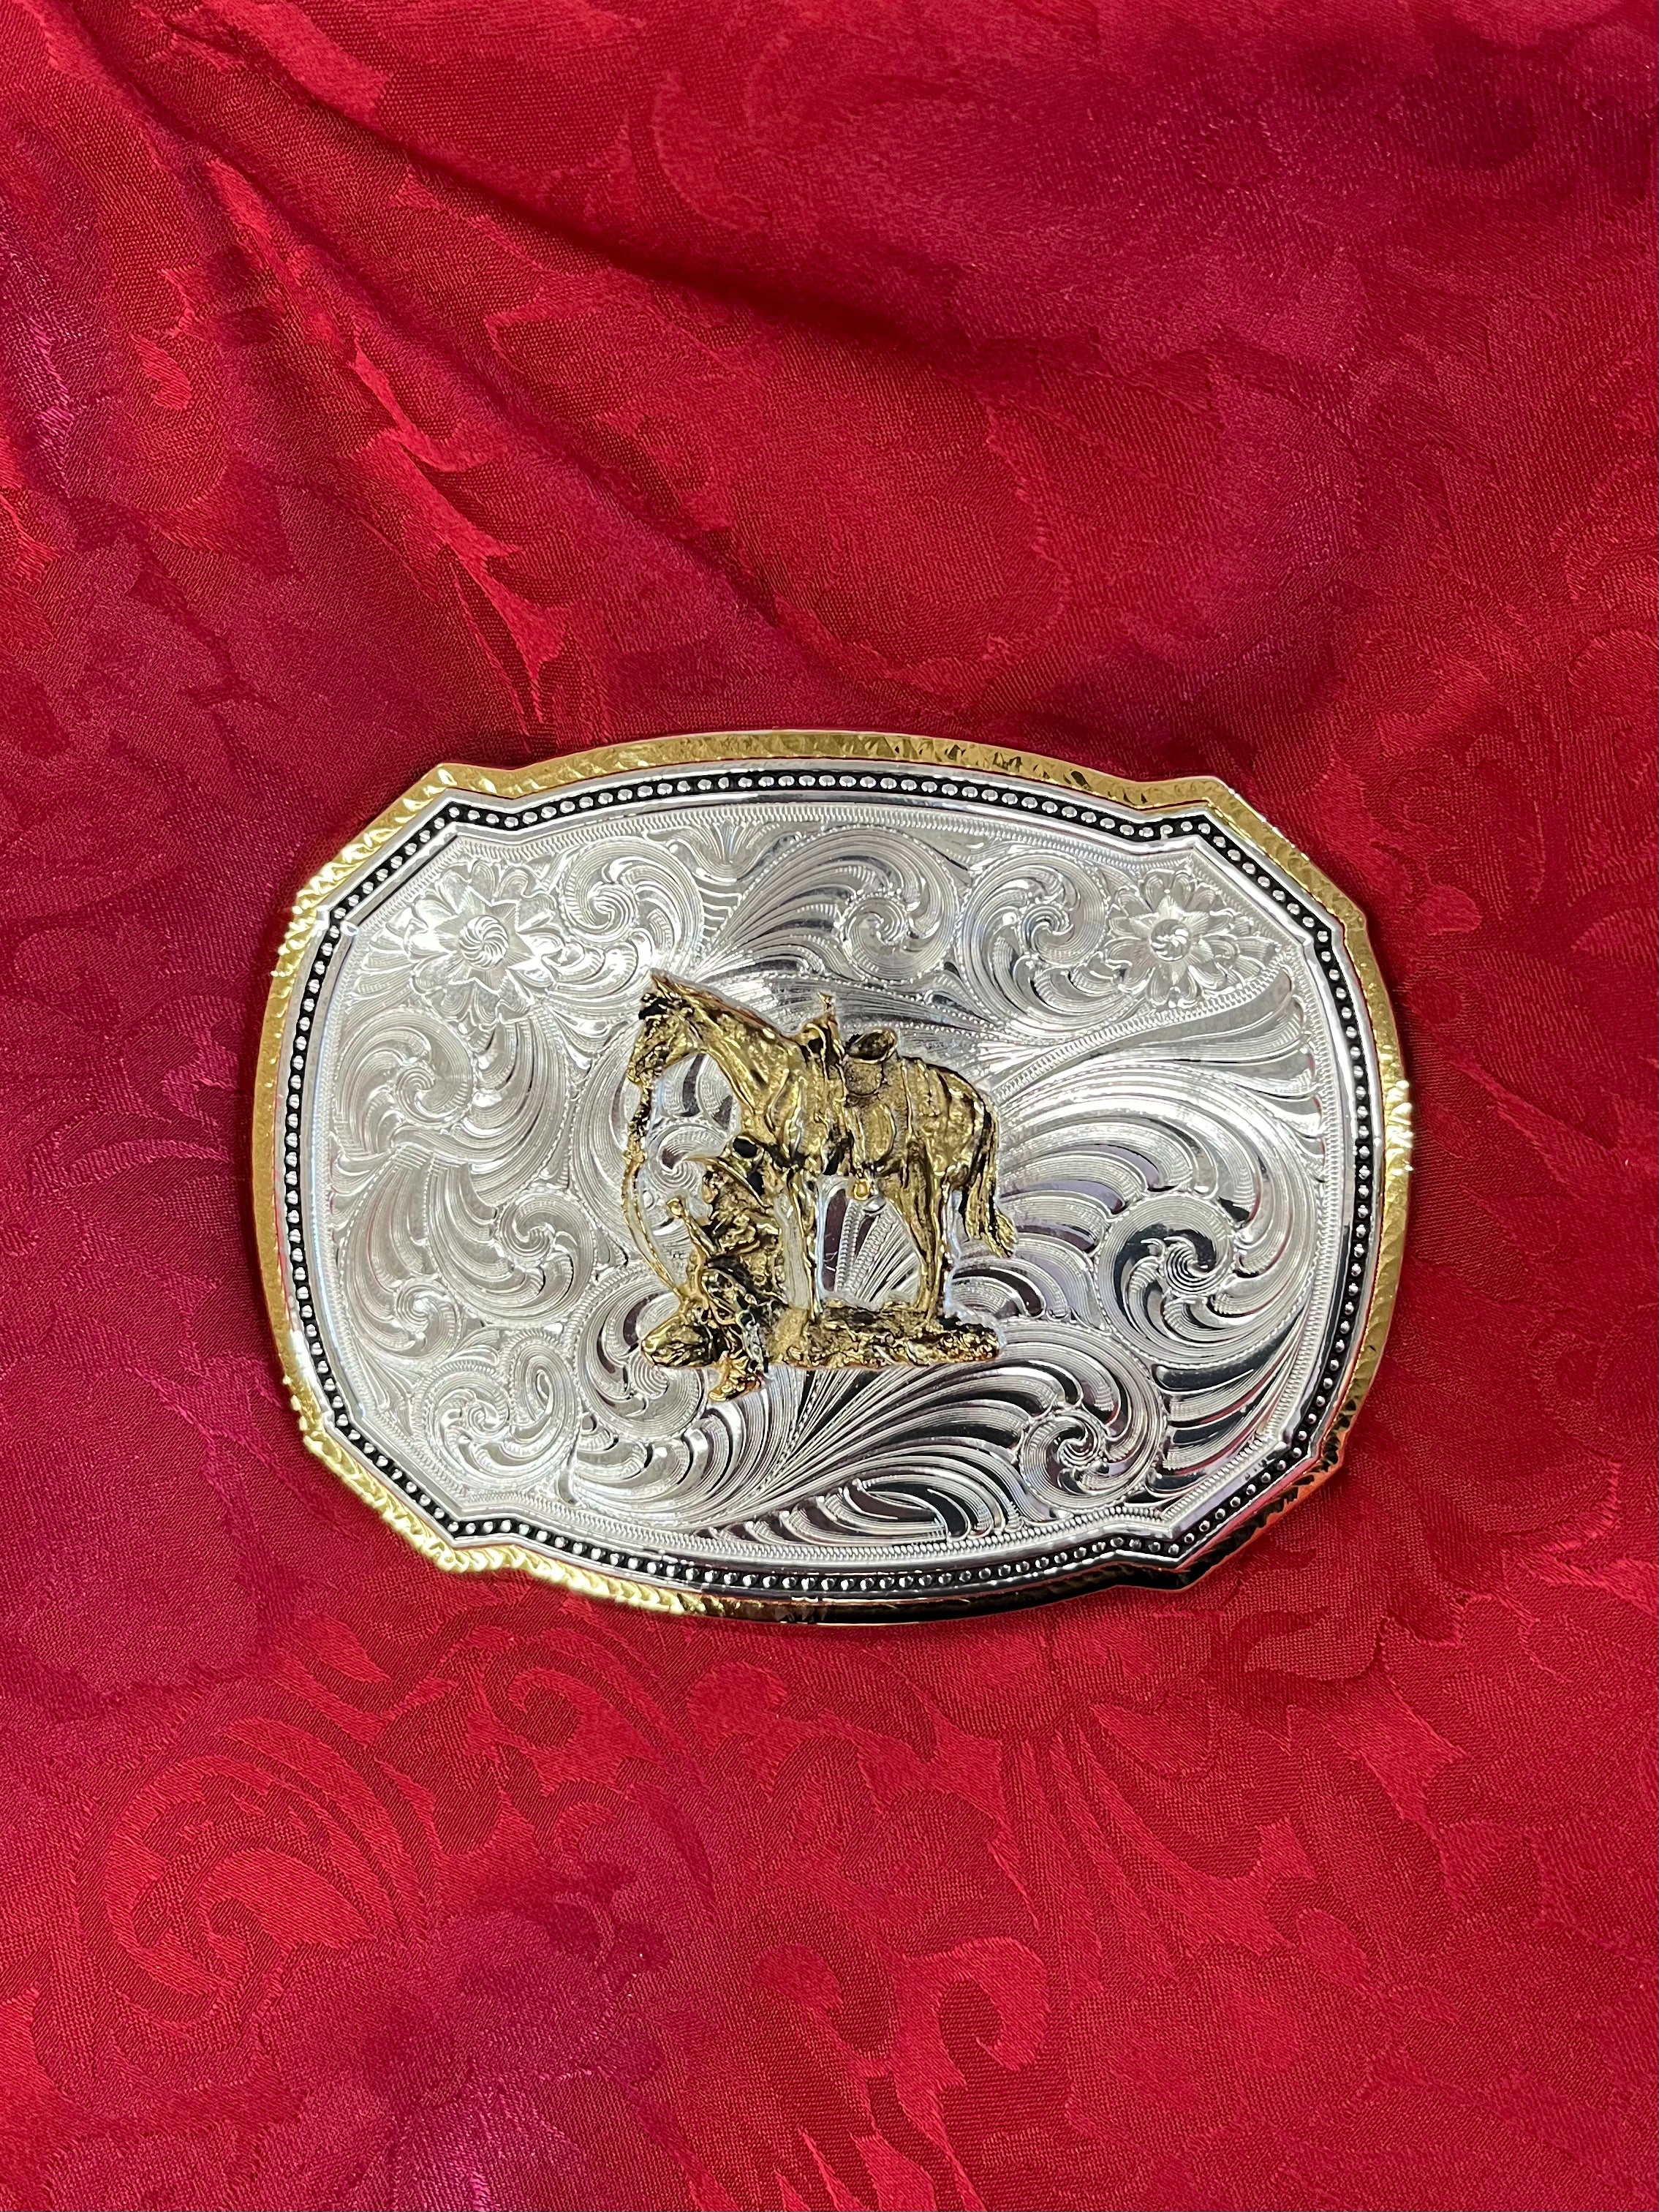 MONTANA COWBOY AND HORSE BUCKLE